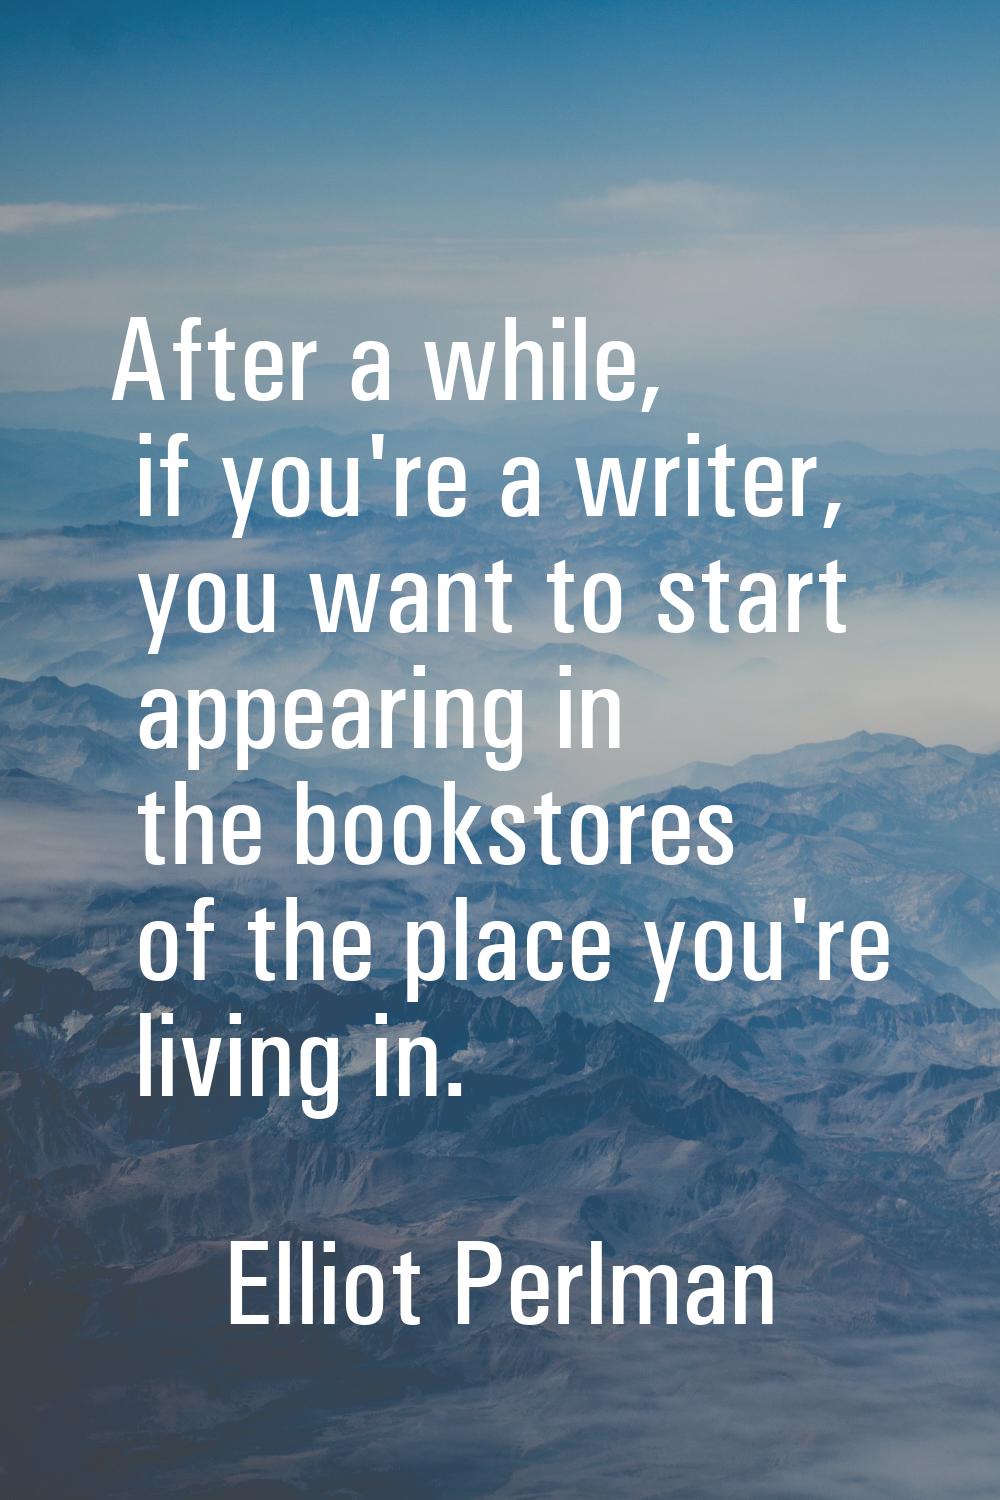 After a while, if you're a writer, you want to start appearing in the bookstores of the place you'r